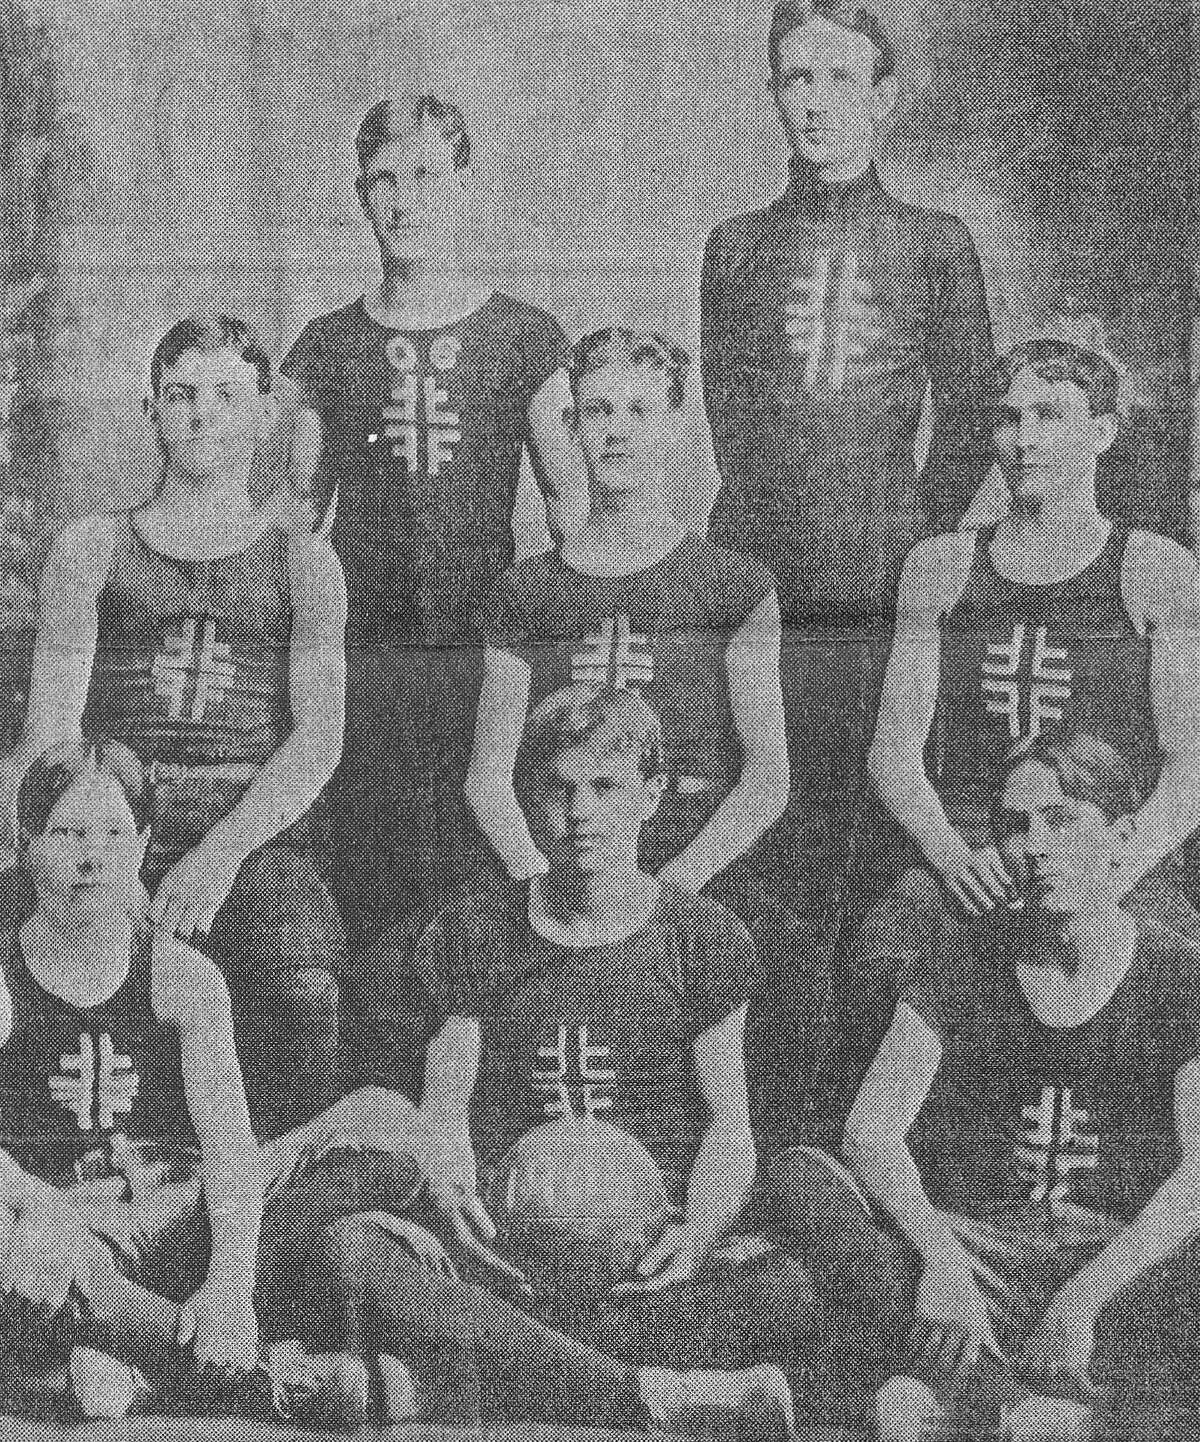 This photo — from the San Antonio Light, Oct. 20, 1940 — shows the Turners basketball team, a San Antonio team dating from 1906 and possibly the city's first titleholders in the sport.